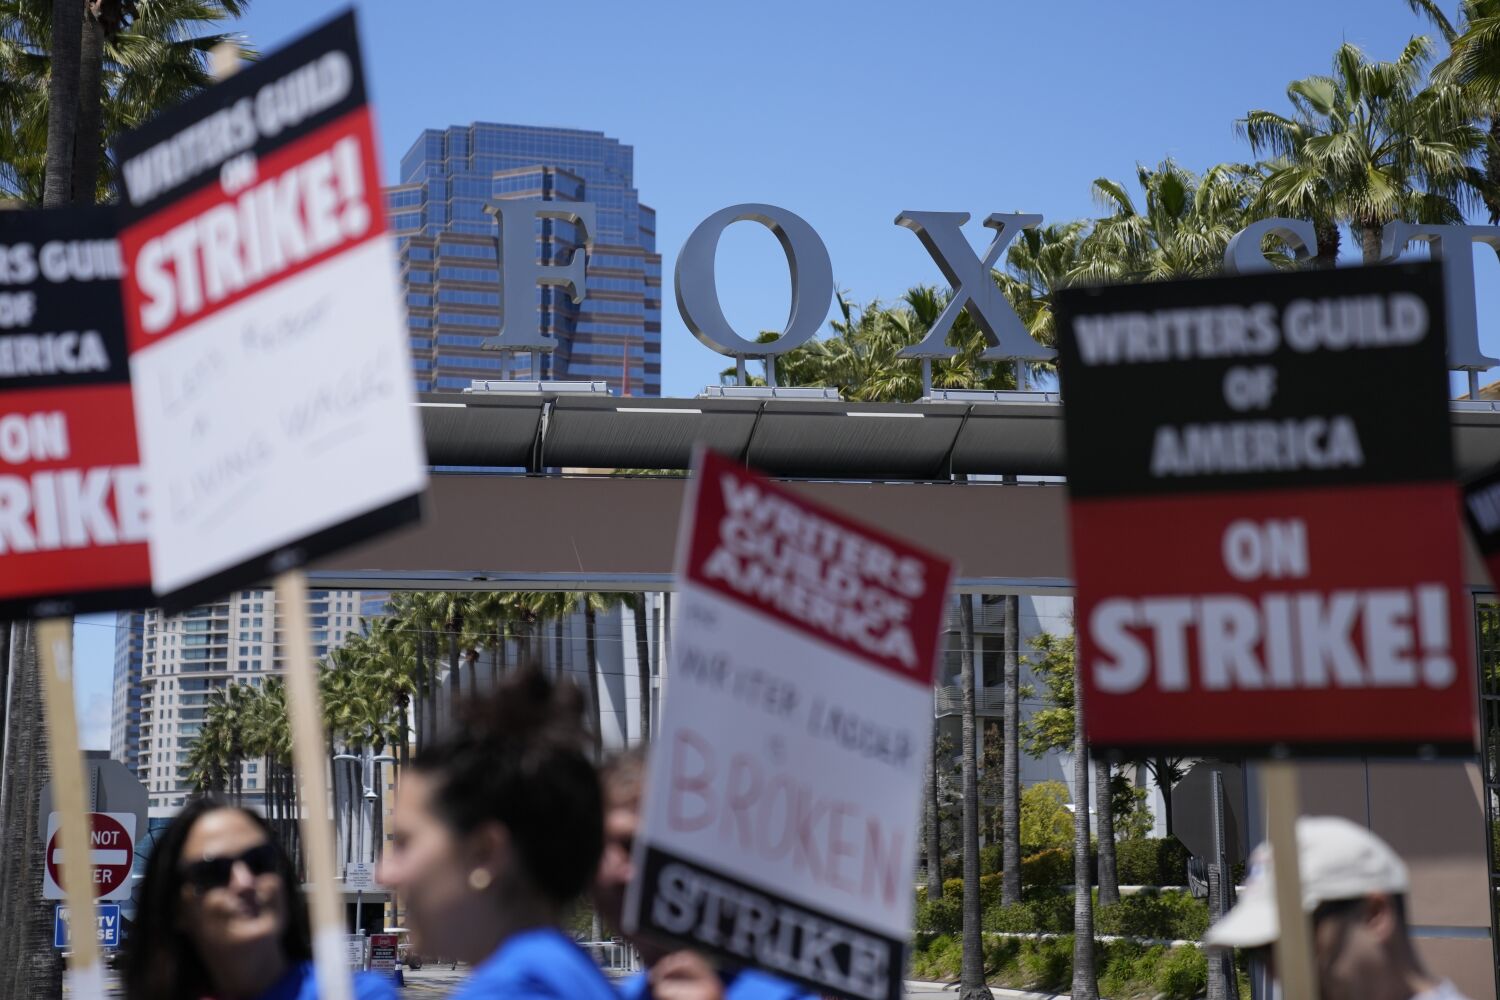 Impact of writers' strike on L.A. economy could surpass 2007 stoppage, experts say